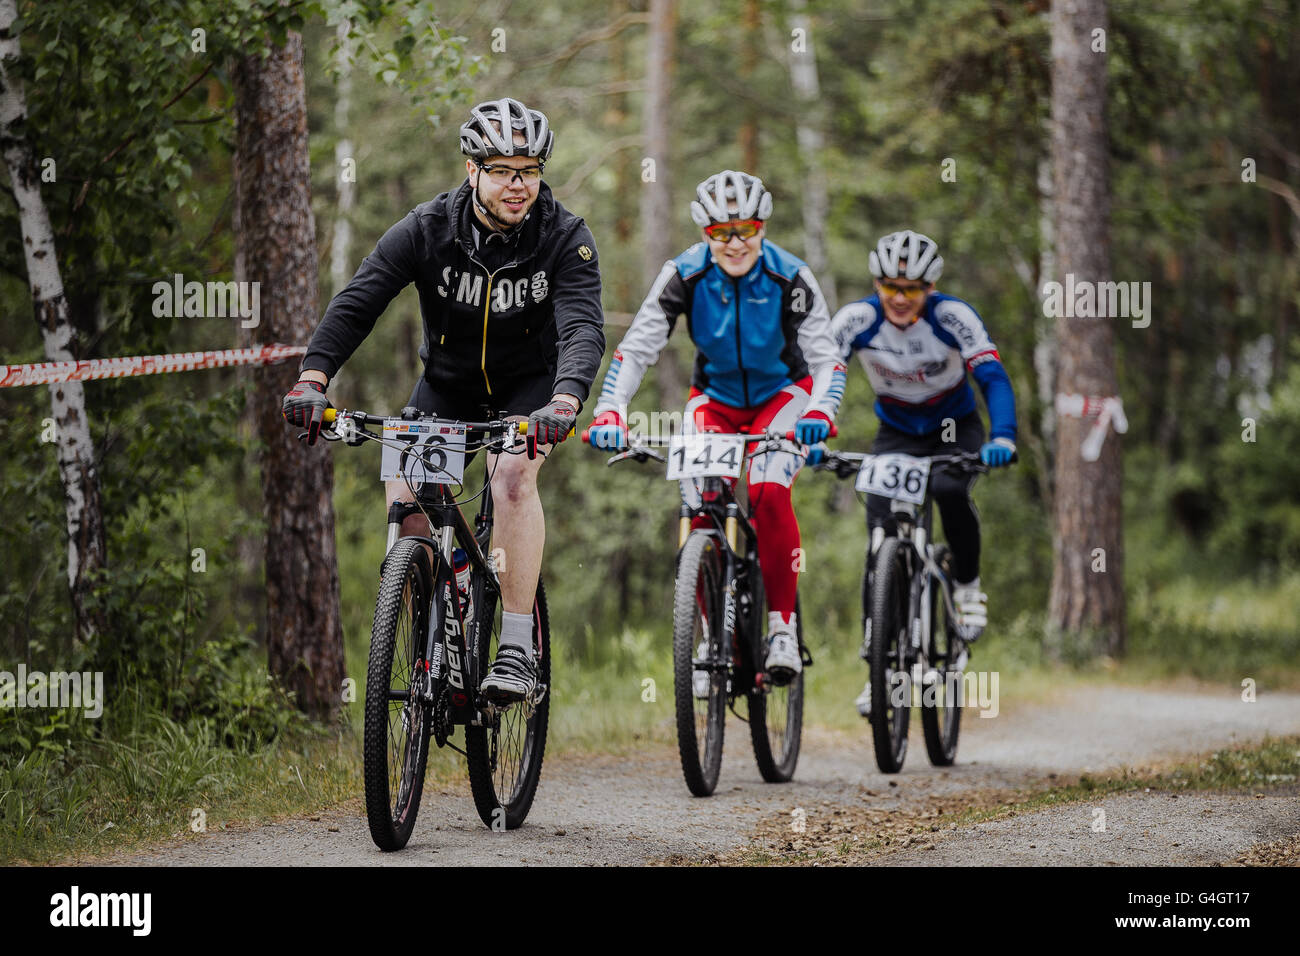 group of male cyclists riding through forest during cross-country race 'New energy' Stock Photo